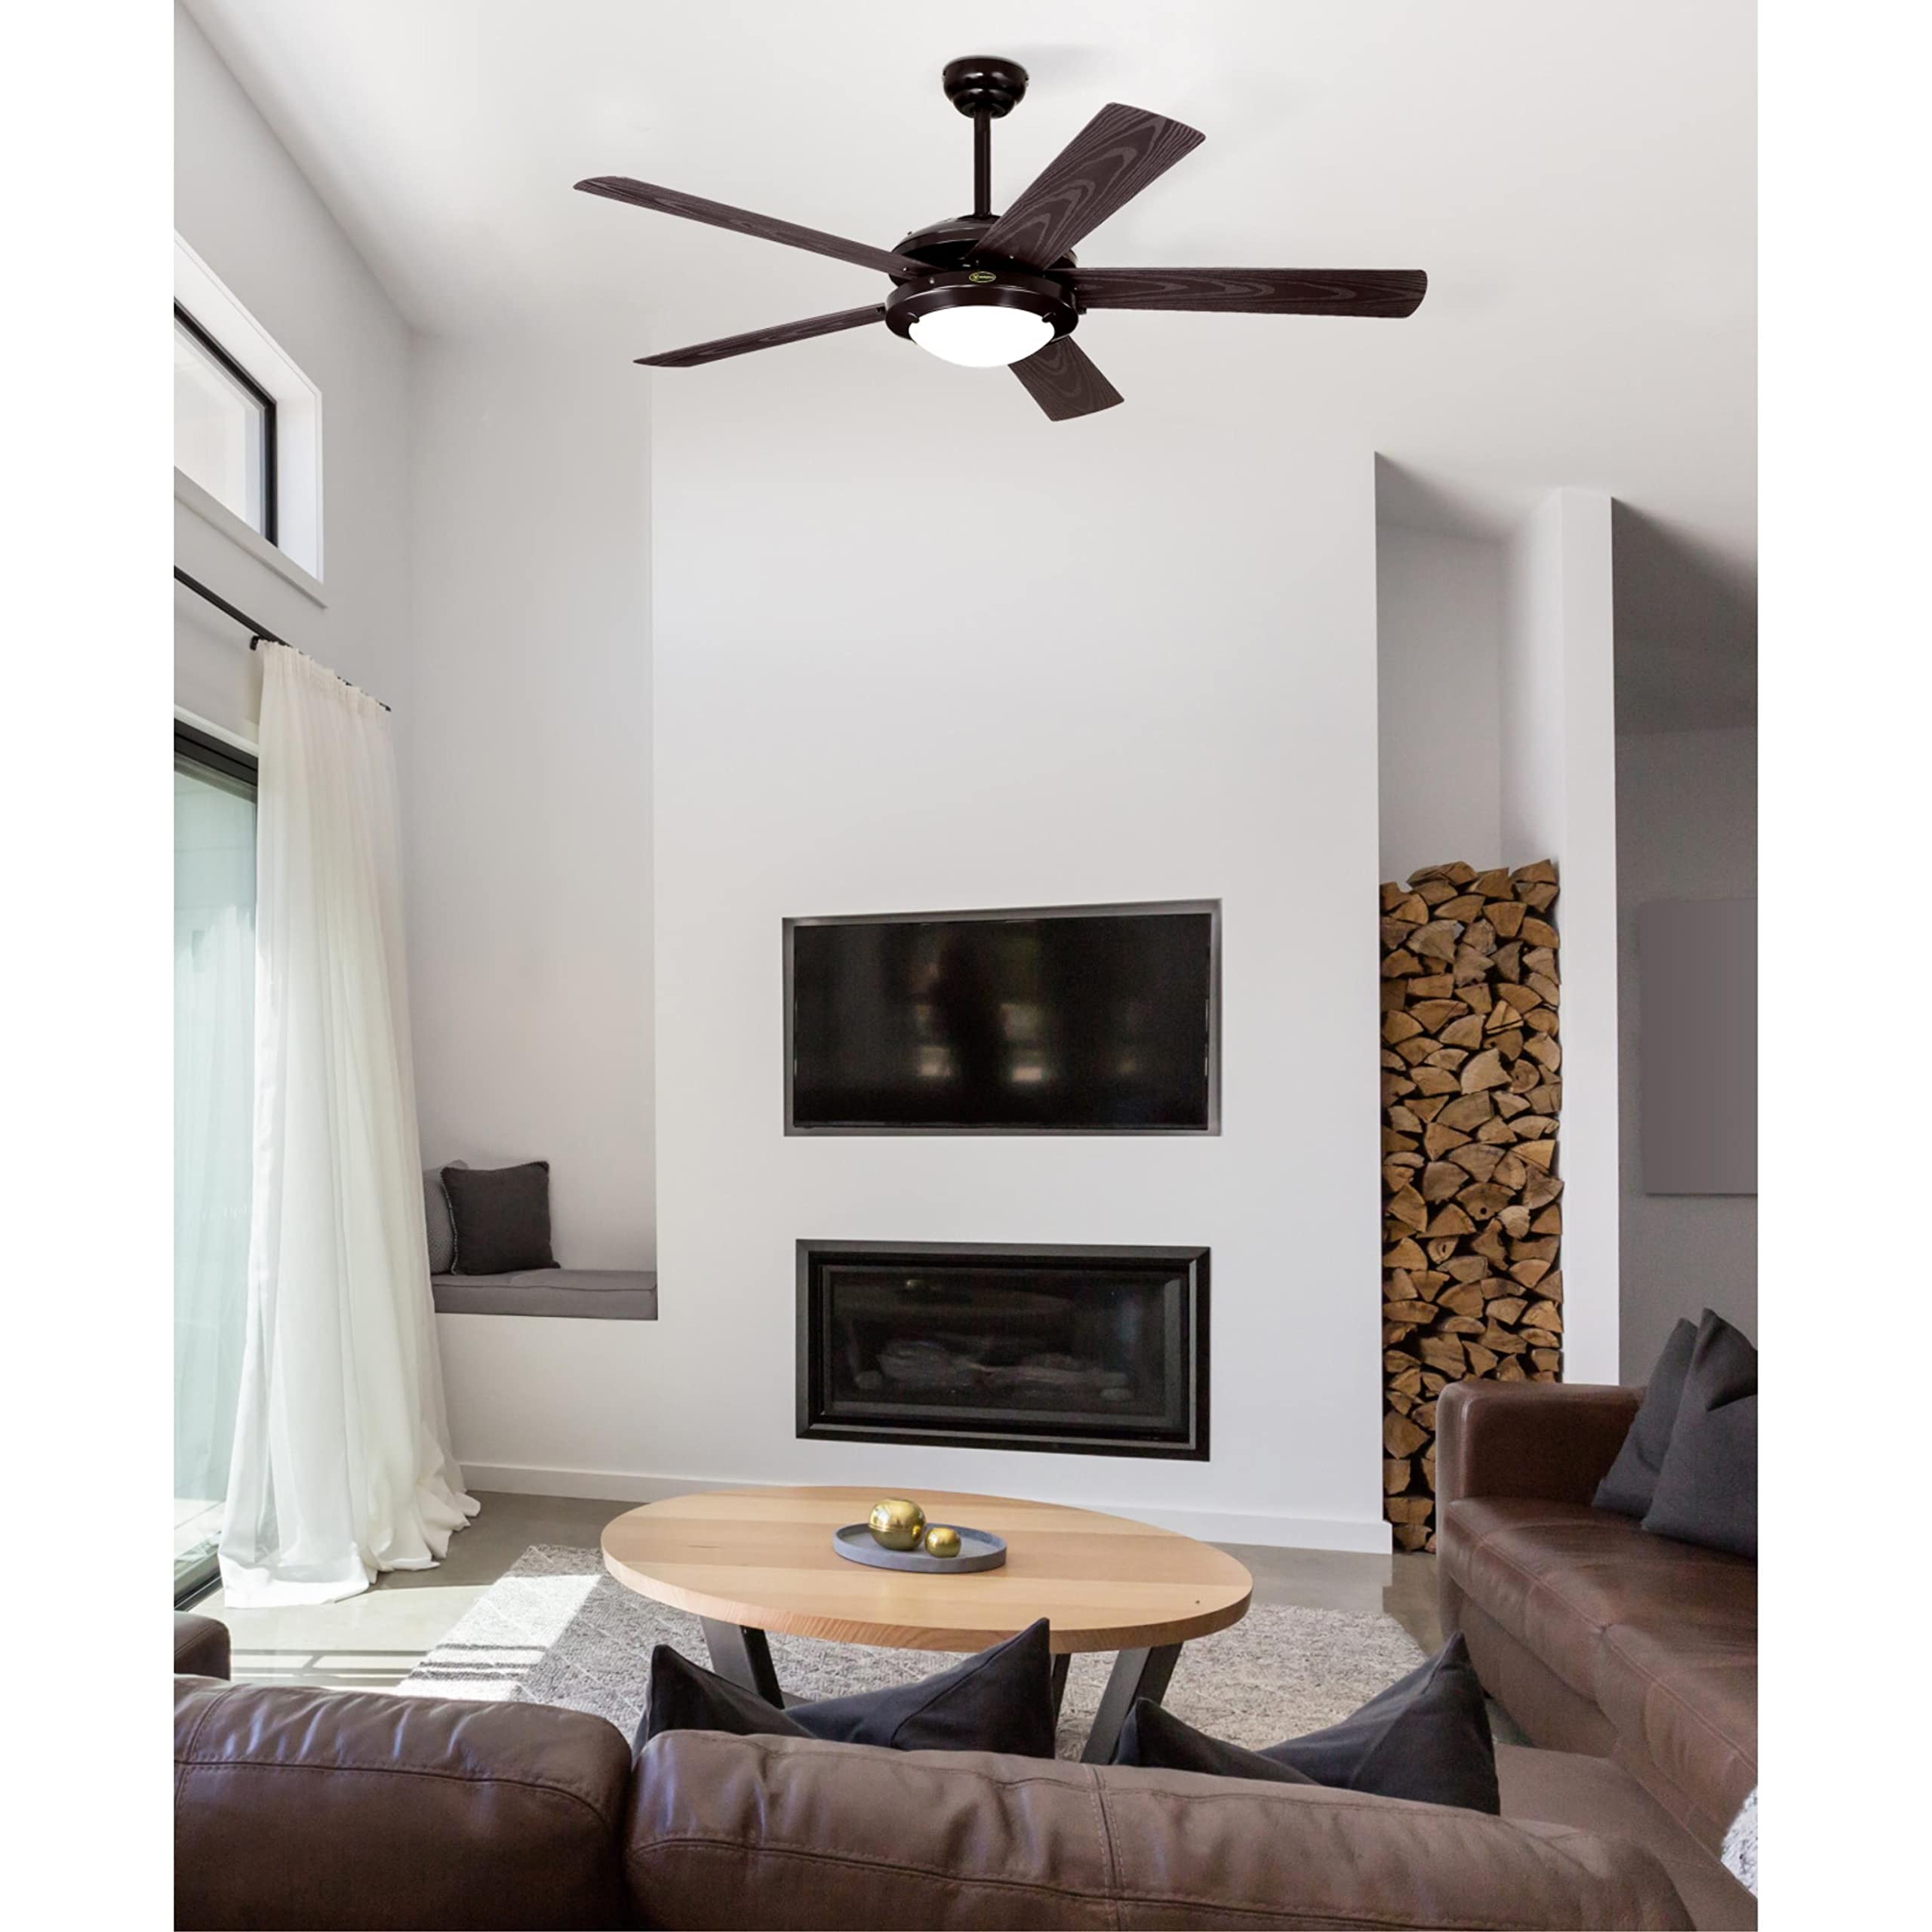 Westinghouse Lighting 7307200 Comet, Transitional Dimmable LED Ceiling Fan with Light, 52 Inch, Espresso Finish, Frosted Glass